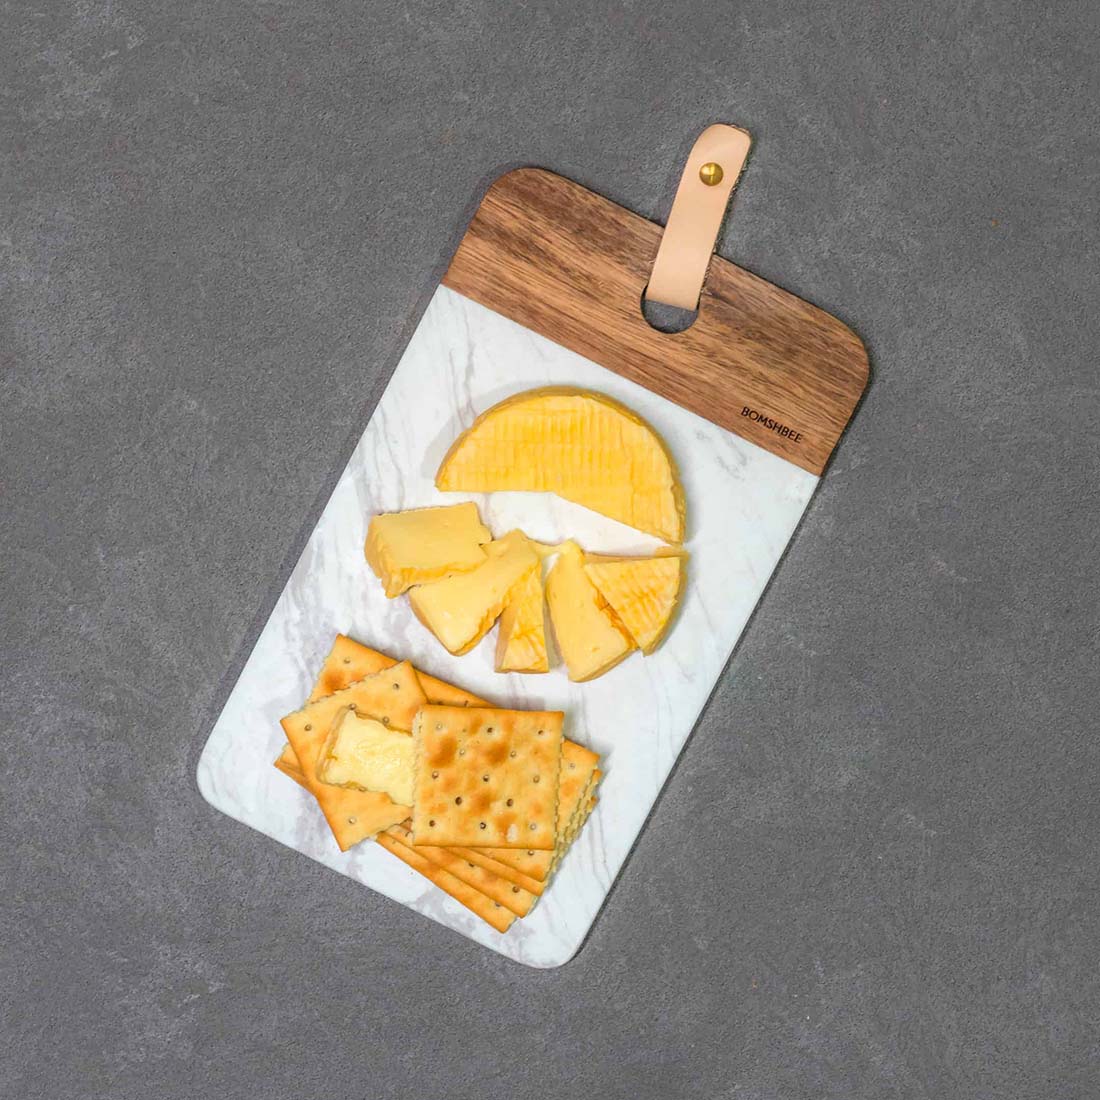 Posh Marble and Wood Serving Board